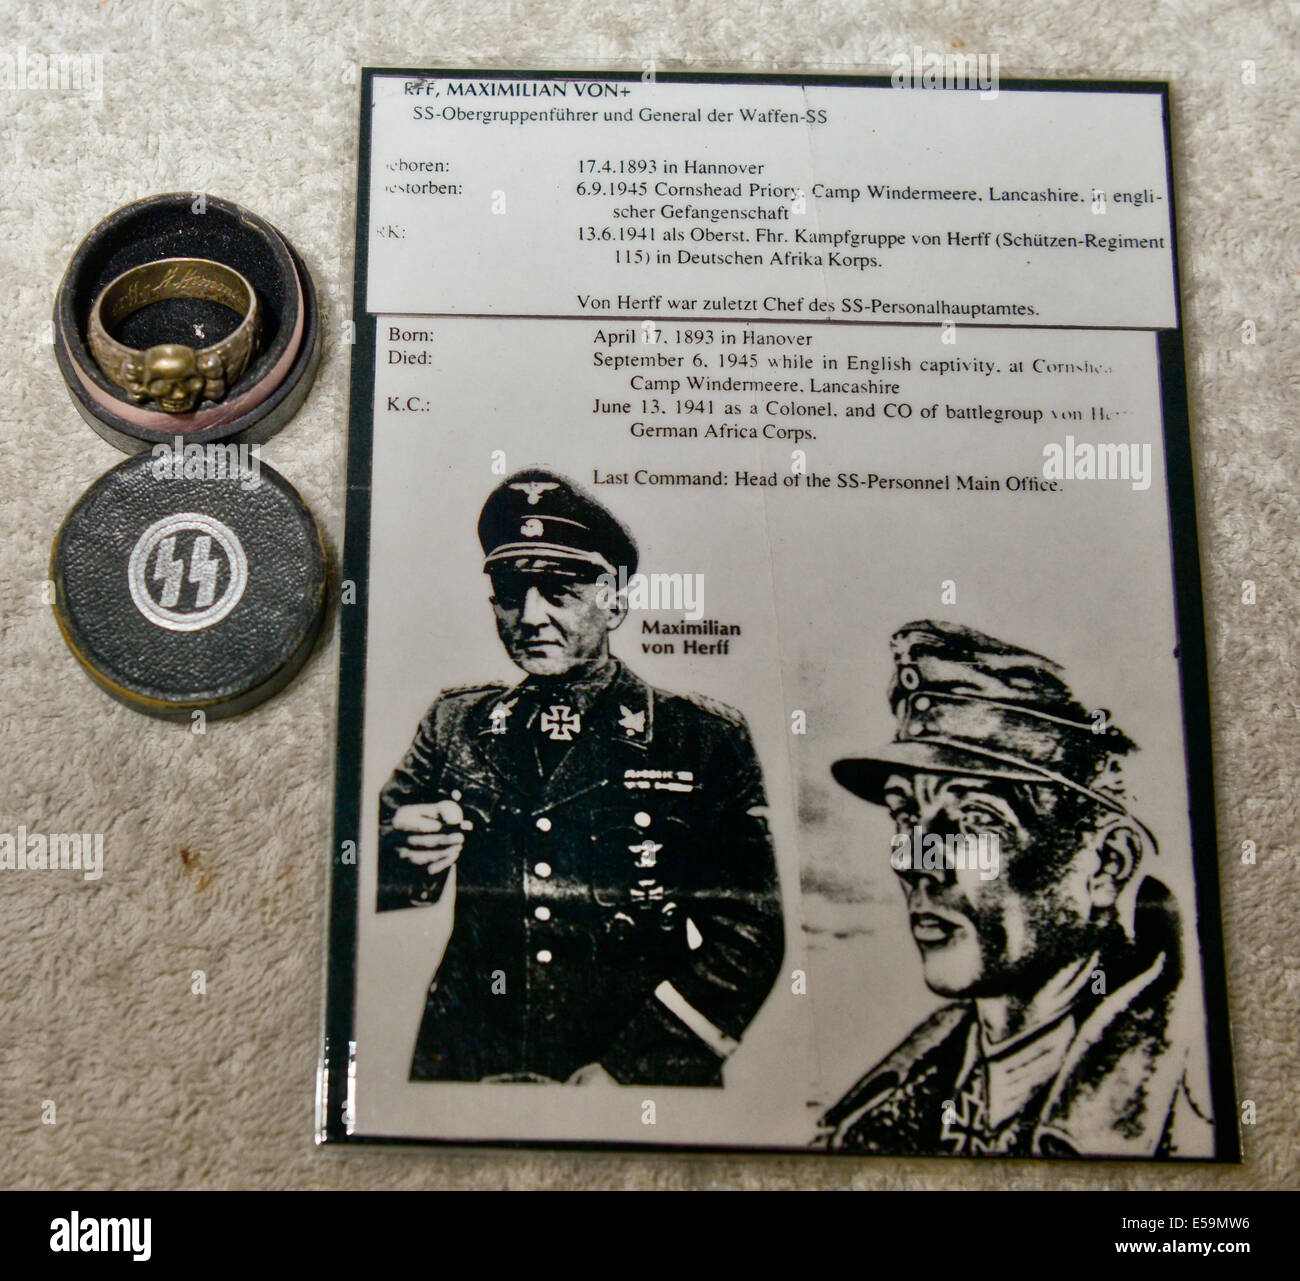 Picture By:Jules Annan Picture Shows:Original Nazi SS Death's Head honour ring and original box Date ; 08/07/2014 Stock Photo